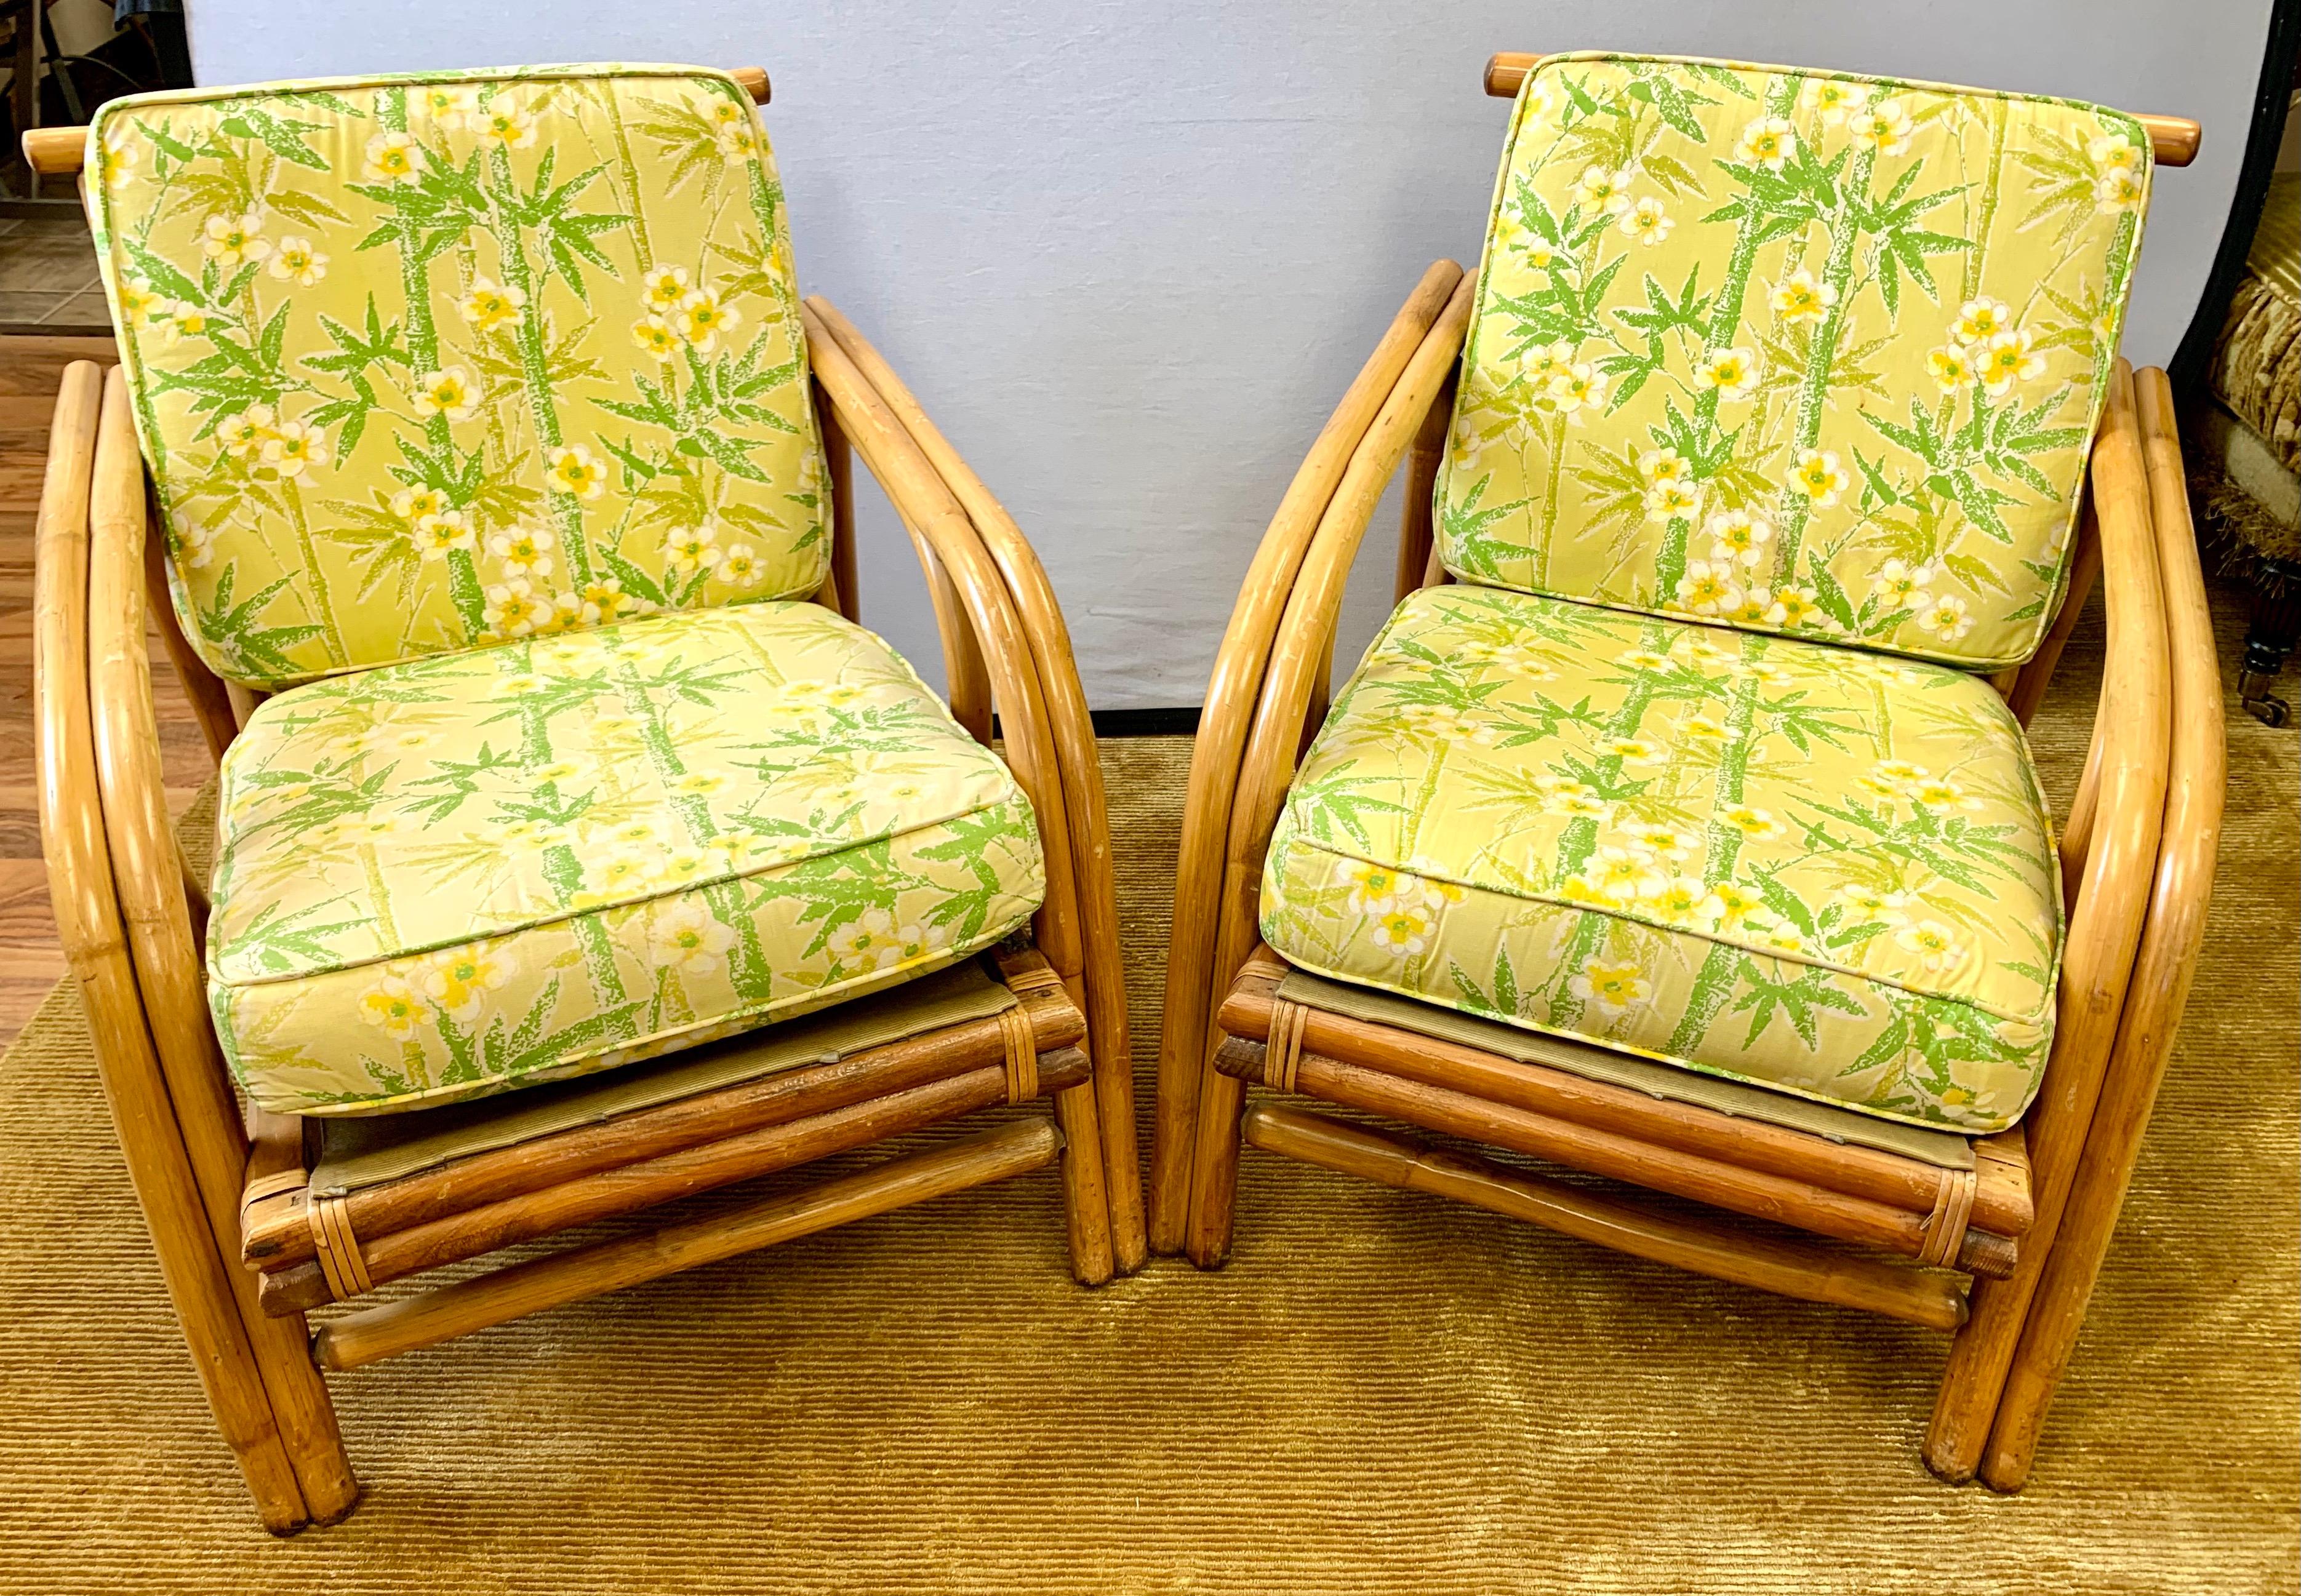 Pair of vintage midcentury bamboo rattan club chairs with original yellow and green tropical print upholstery. Structurally sound with e excellent craftsmanship on the bamboo frames.